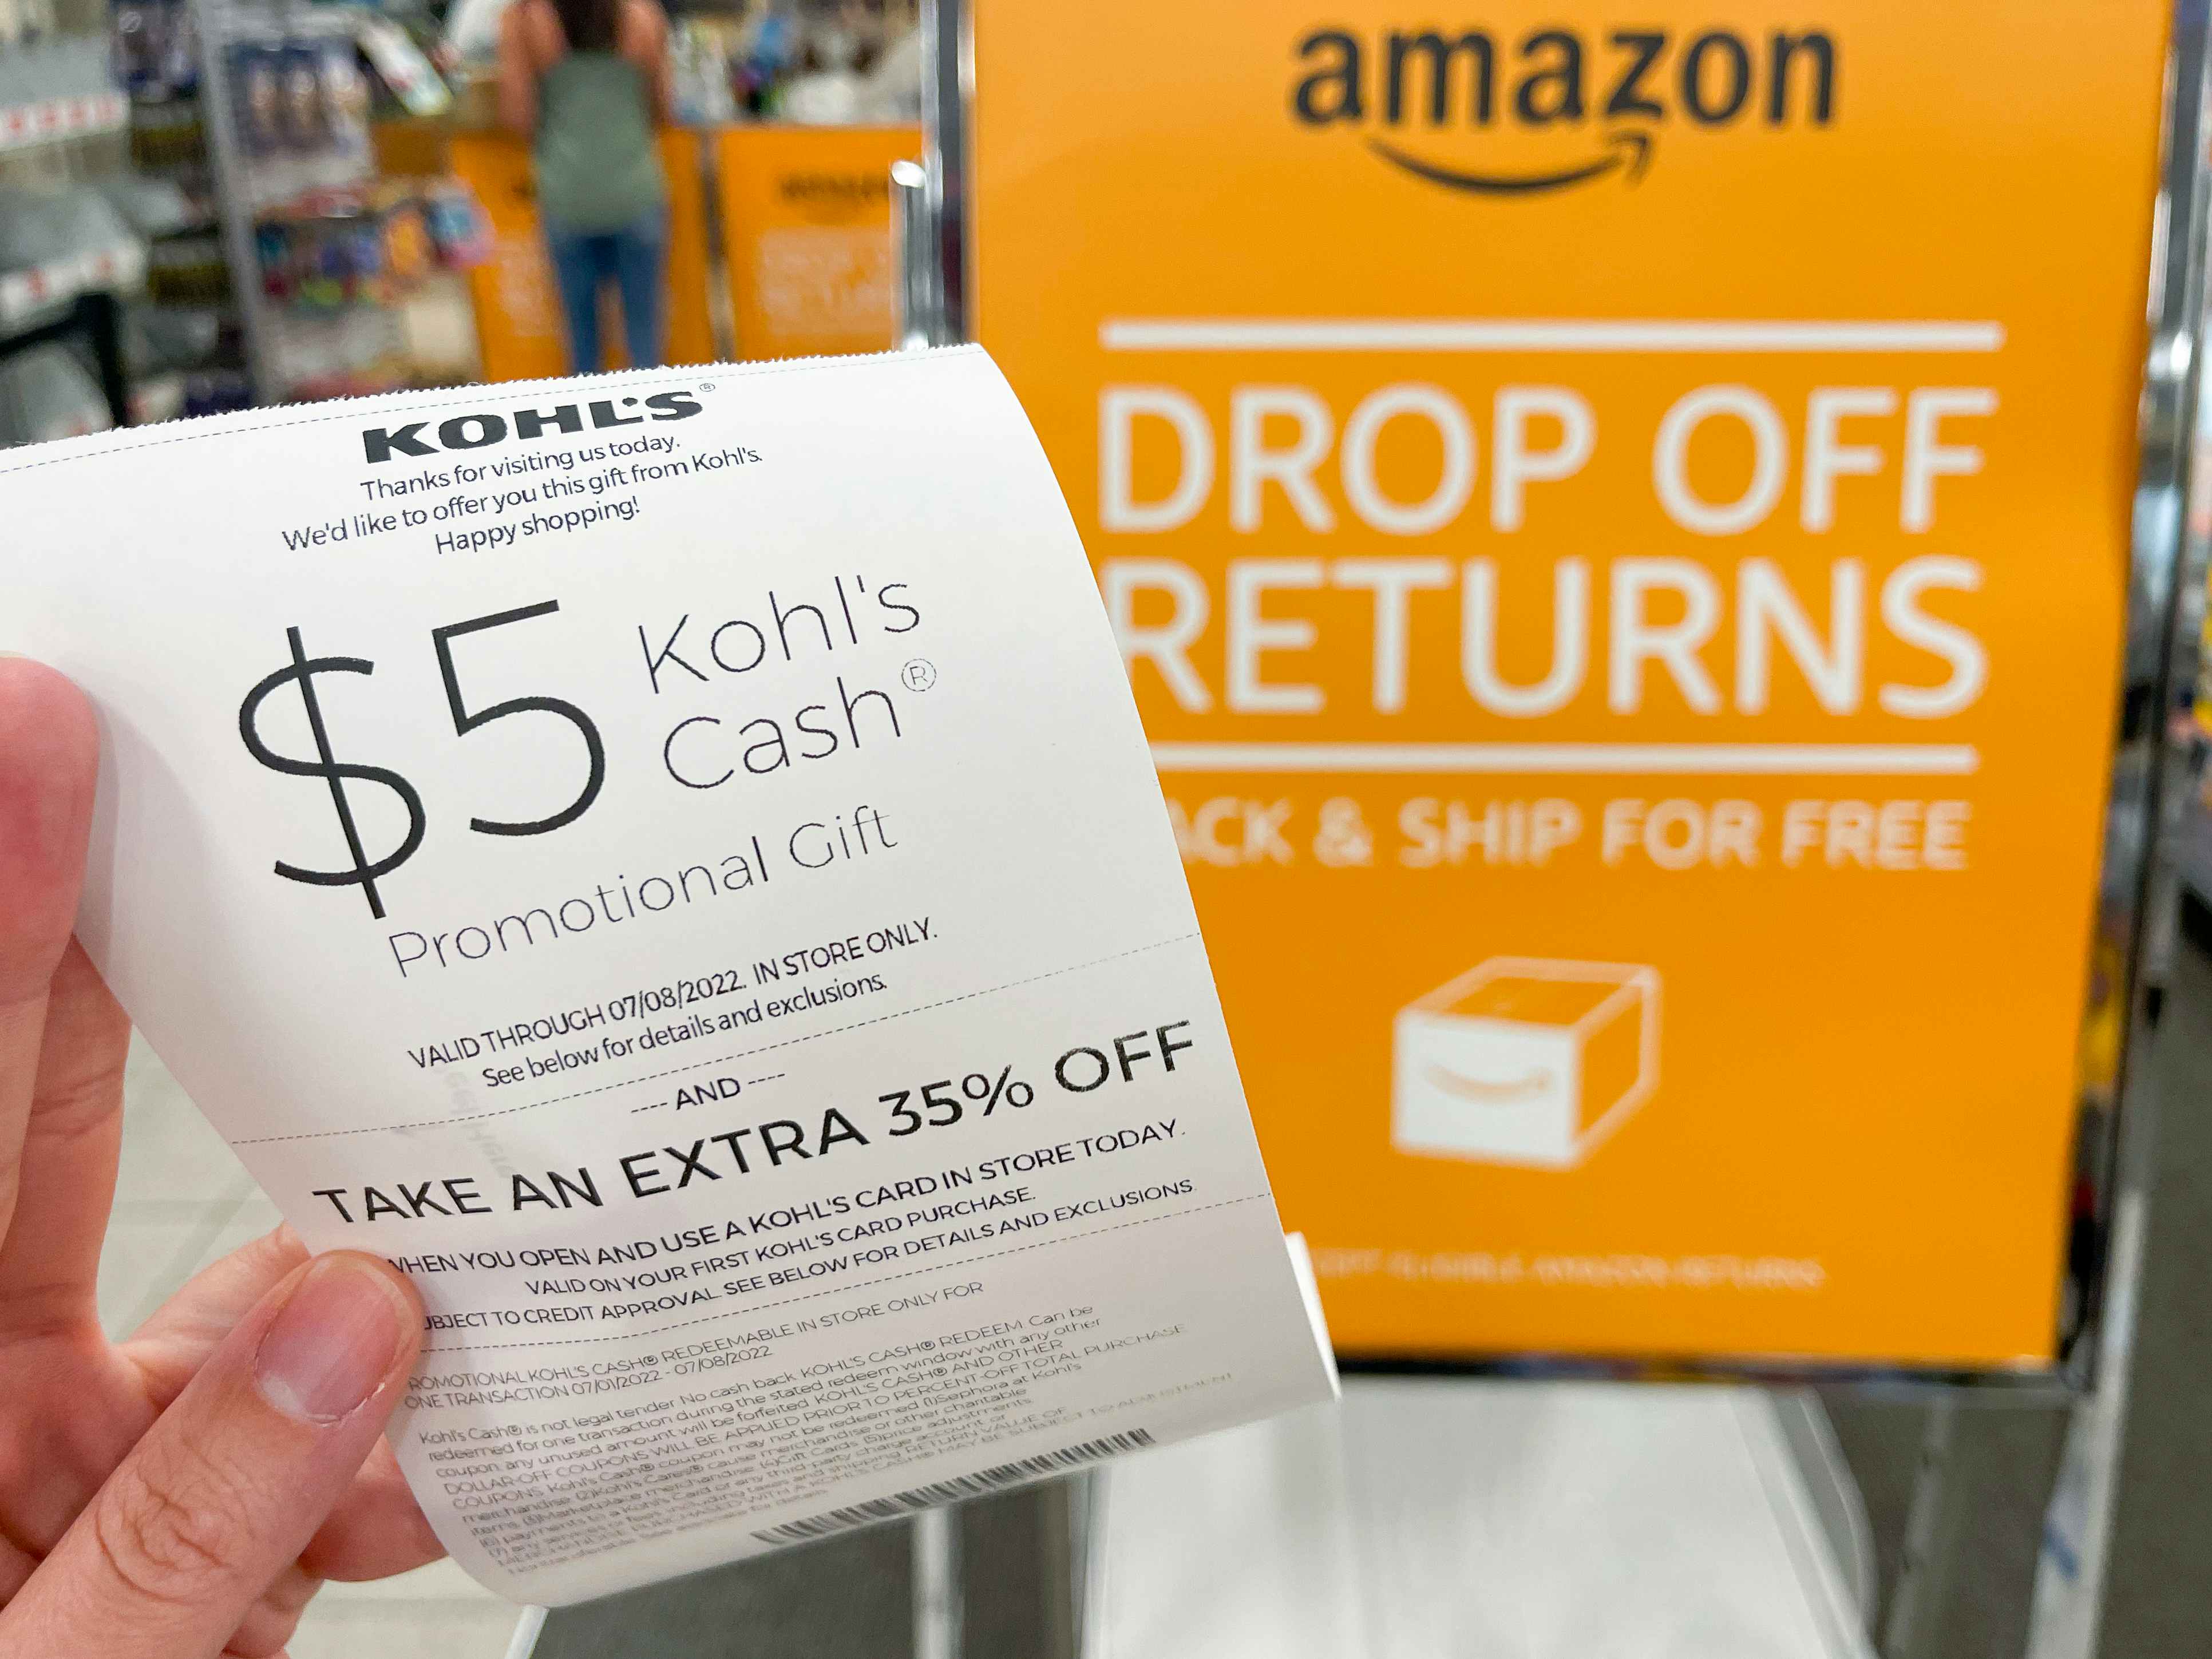 A person's hand holding a $5 Kohl's Cash coupon on a receipt for returning an Amazon package next to the Amazon drop off returns sign inside Kohl's.